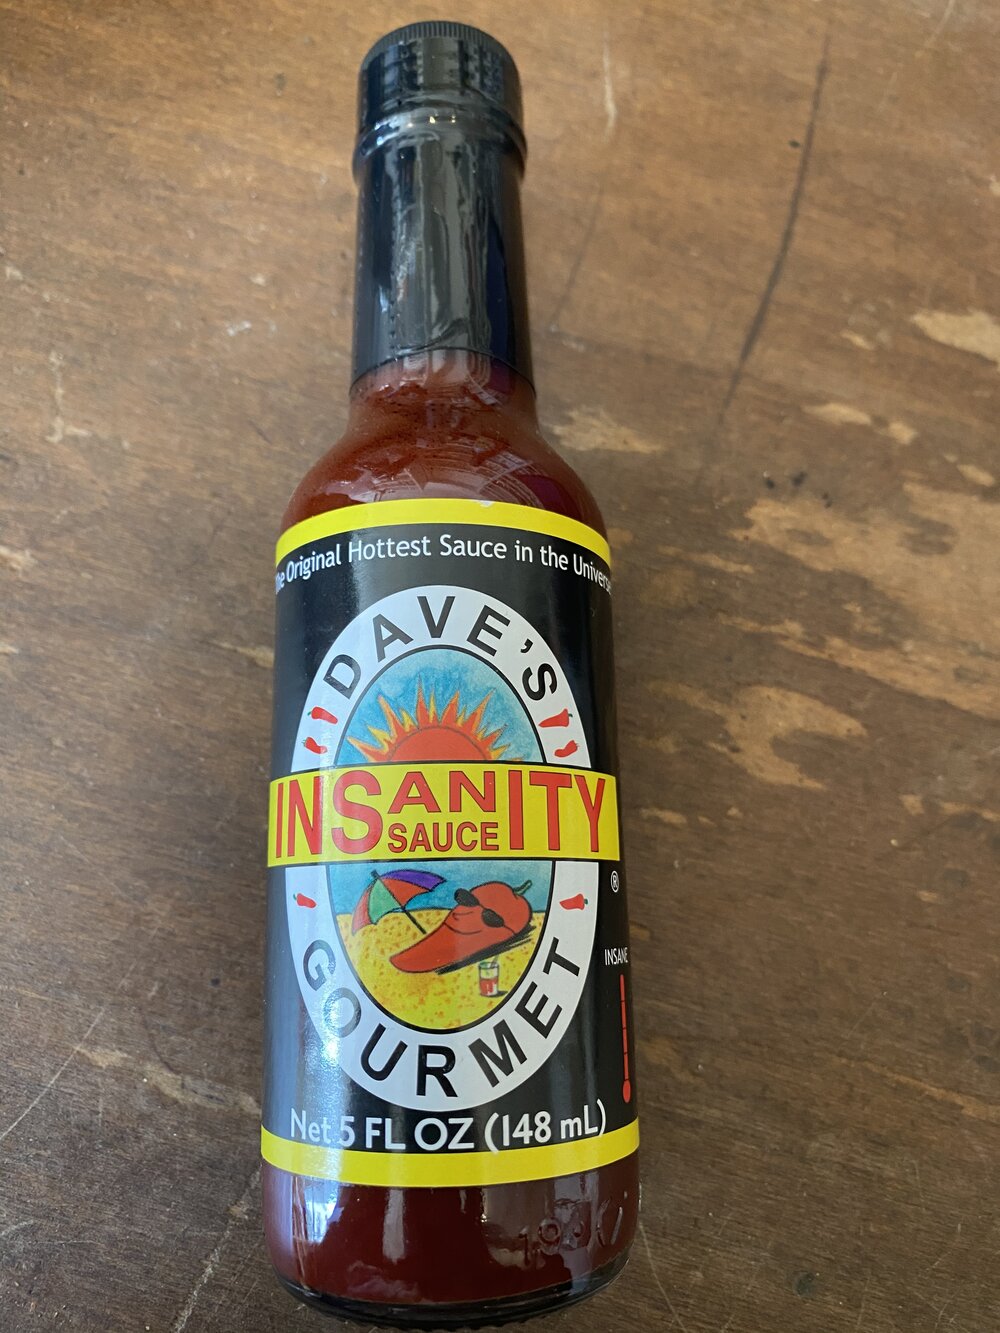 Dave's Insanity hot sauce